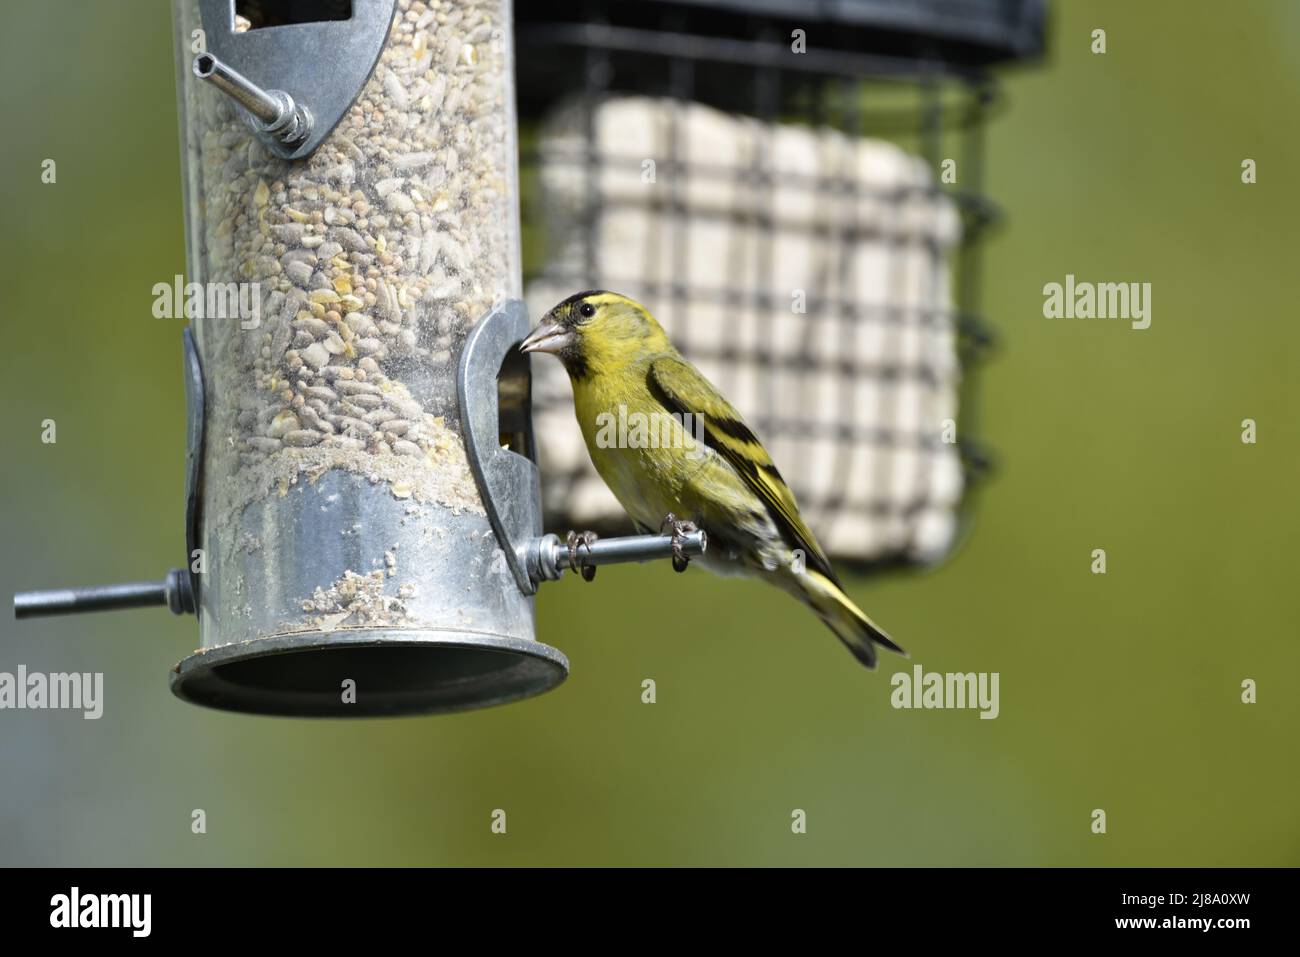 Close-Up Left-Profile Image of a Male Eurasian Siskin (Carduelis spinus) Perched on the Peg of a Seed Feeder in the Sun Against a Green Background Stock Photo